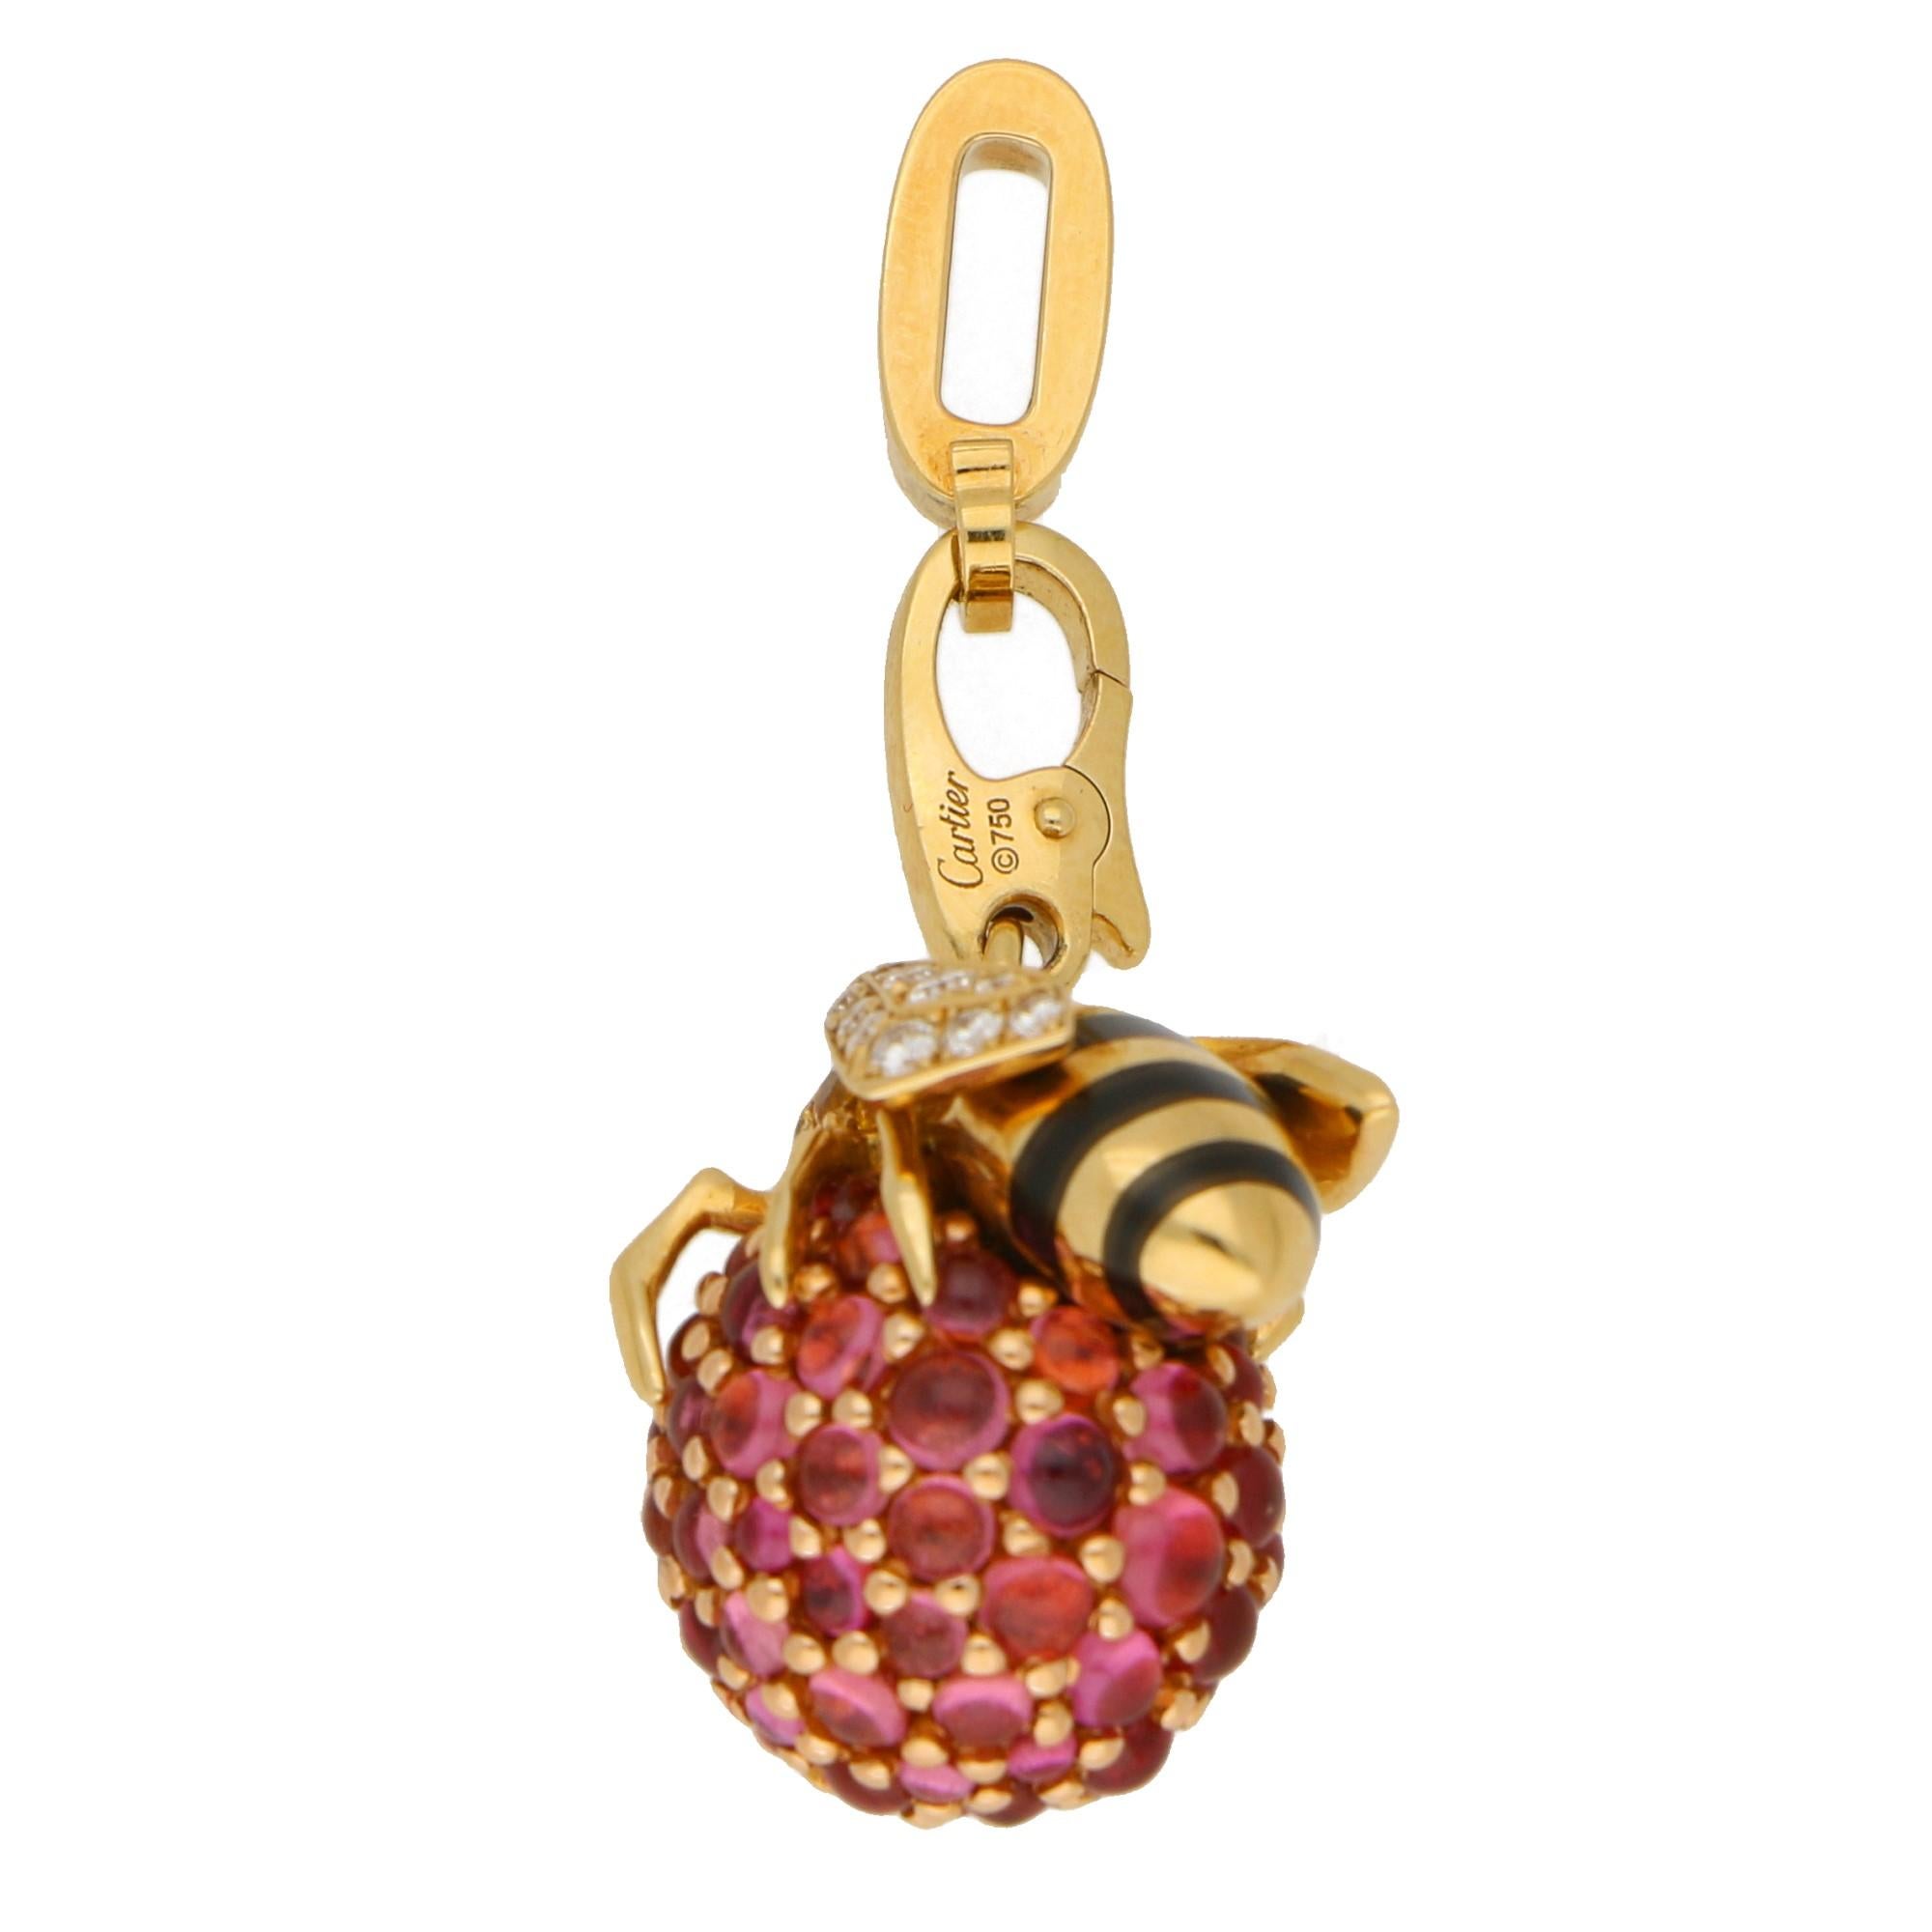 A limited edition Cartier Bee charm in 18-karat yellow gold. This charm, limited to 24 pieces worldwide, portrays a bee laying on a raspberry. The bee is designed in polished yellow gold, with black lacquer stripes on the tail, rubover-set